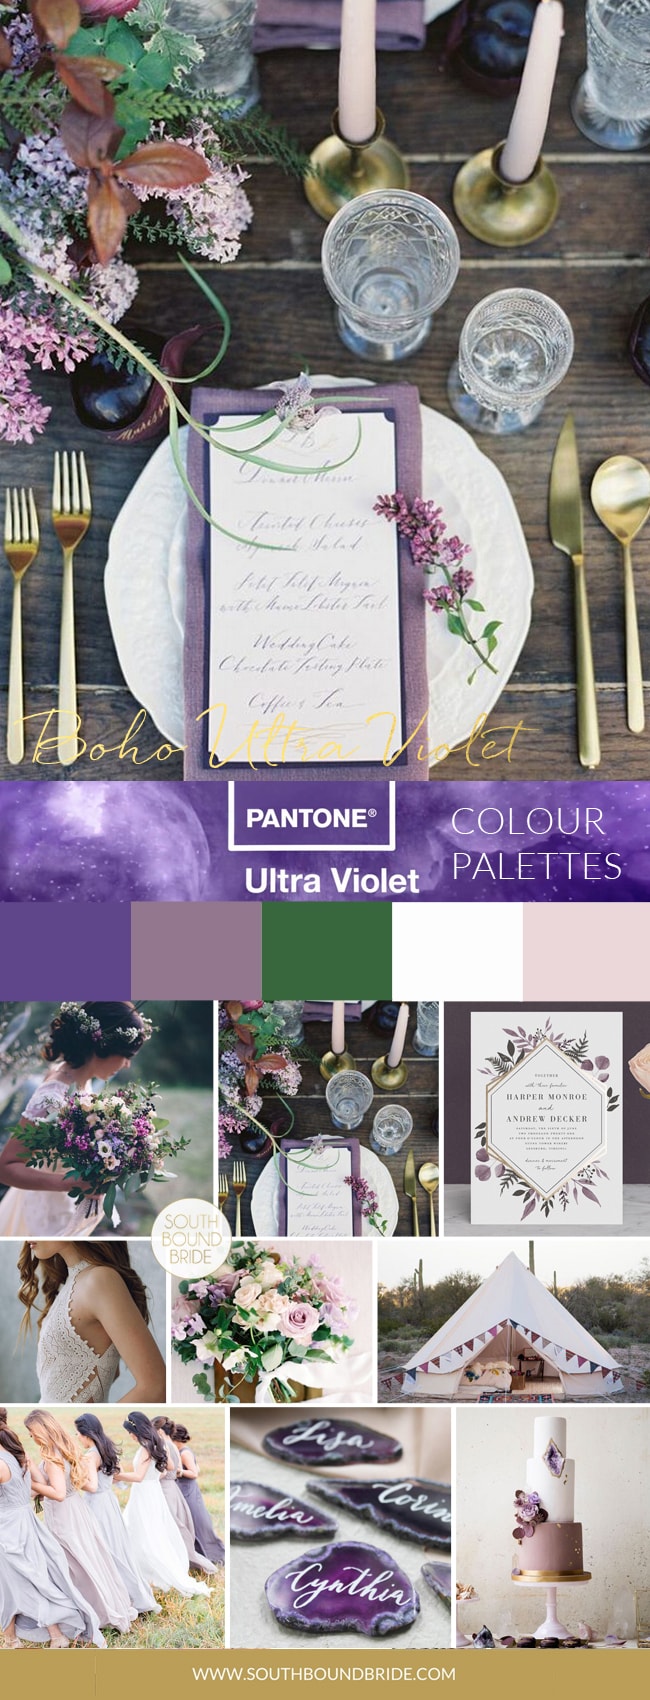 Pantone Colour of the Year 2018: Ultra Violet Inspiration Boards | SouthBound Bride